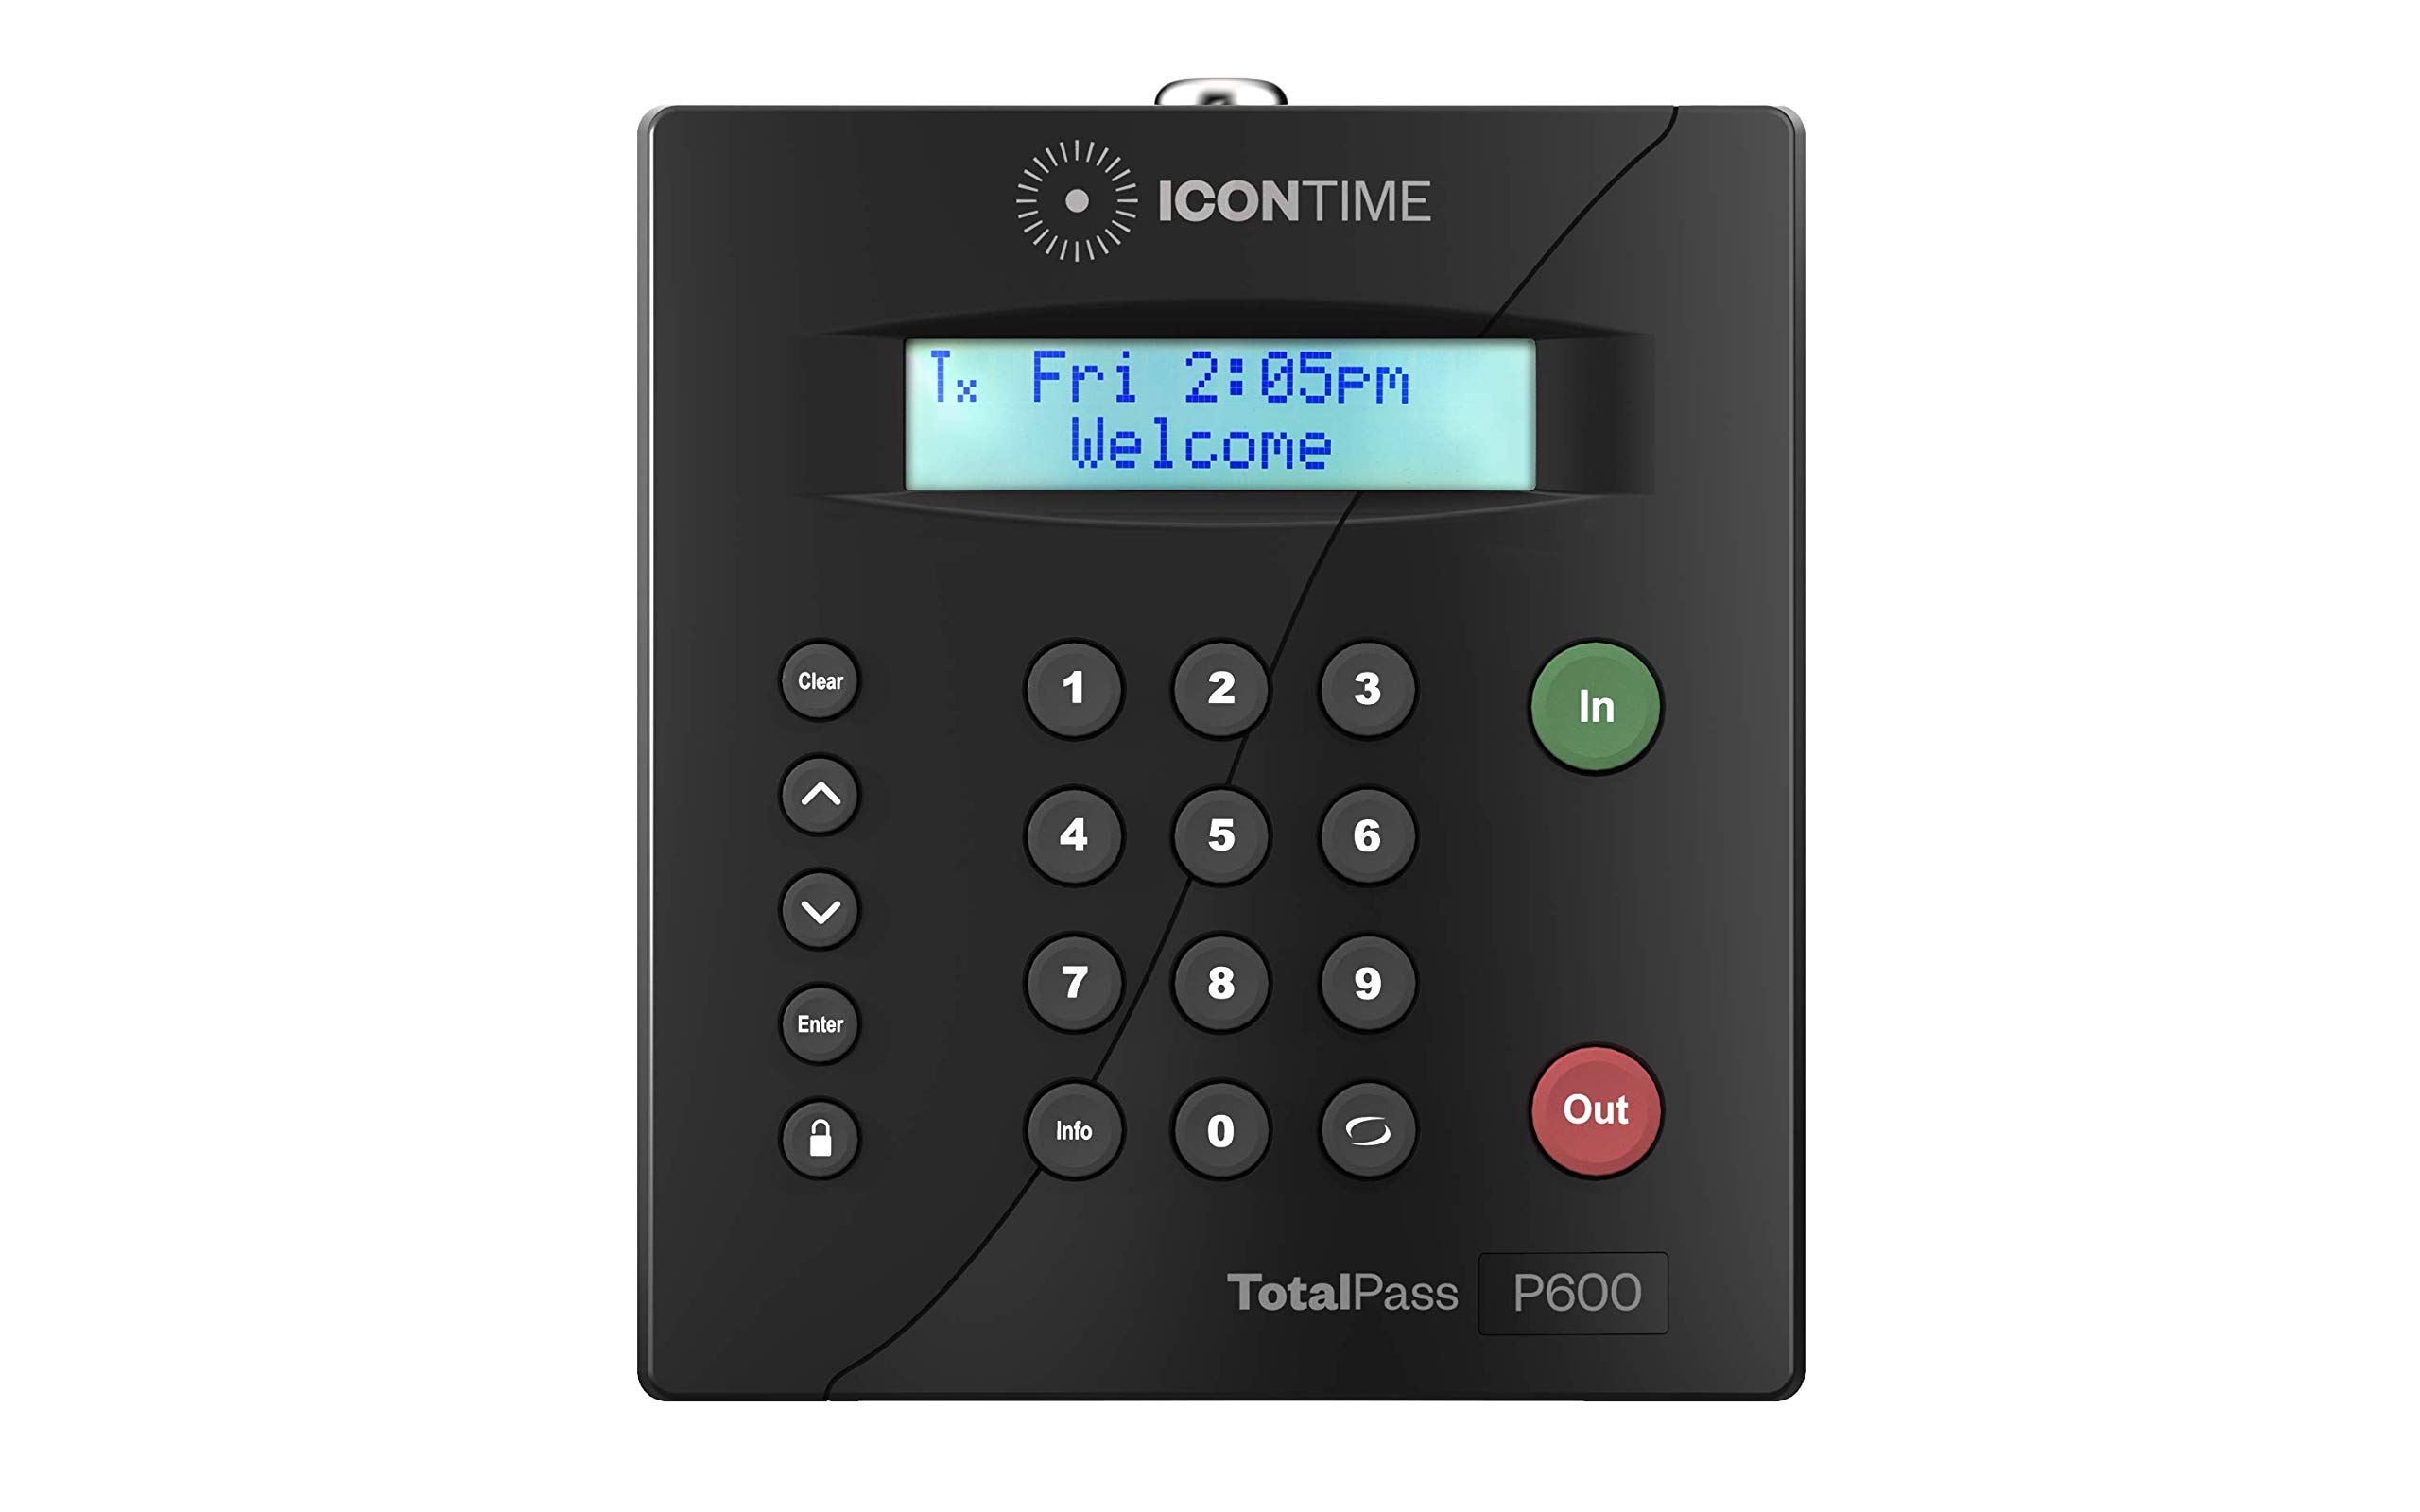  Icon Time Systems TotalPass P600 Employee Time Clock | Made in USA| Ready to Use Out-of-The-Box | Manage Timecards via USB, Network, Wi-Fi or Web| Time Clock Entry Options PIN-Keypad, RFID Badge or...